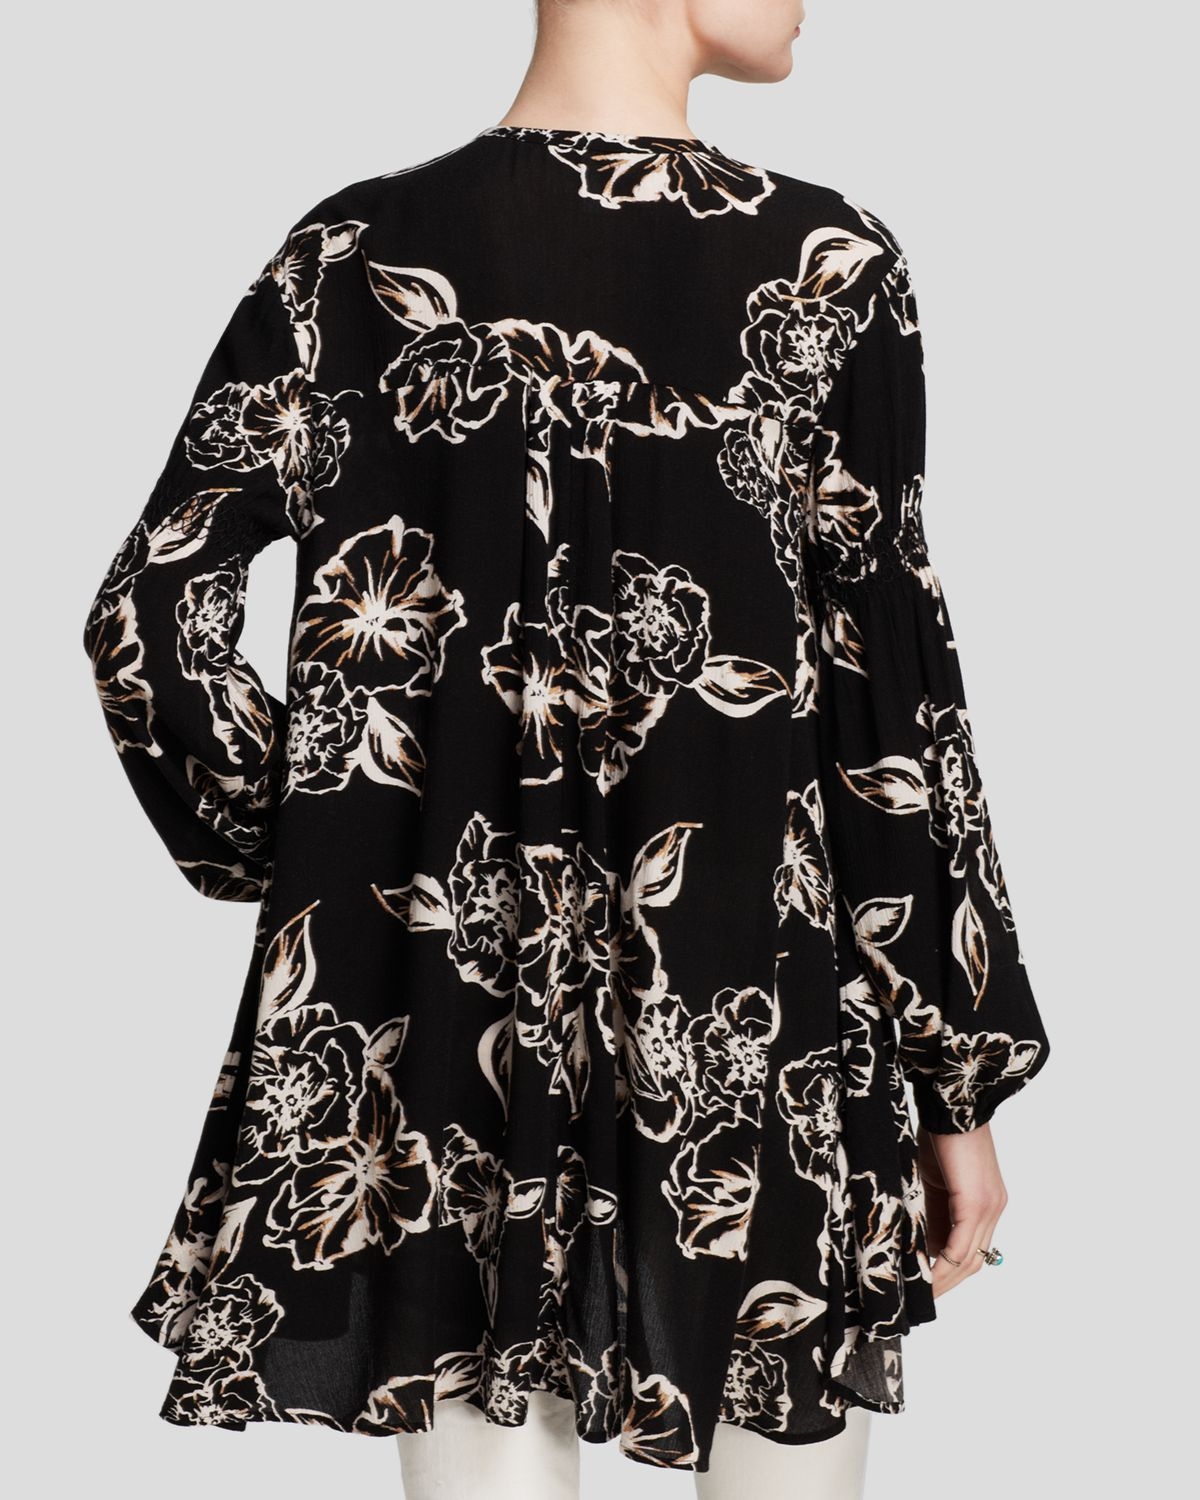 Lyst - Free People Tunic Top - Printed Snap Out Of It Swing in Black